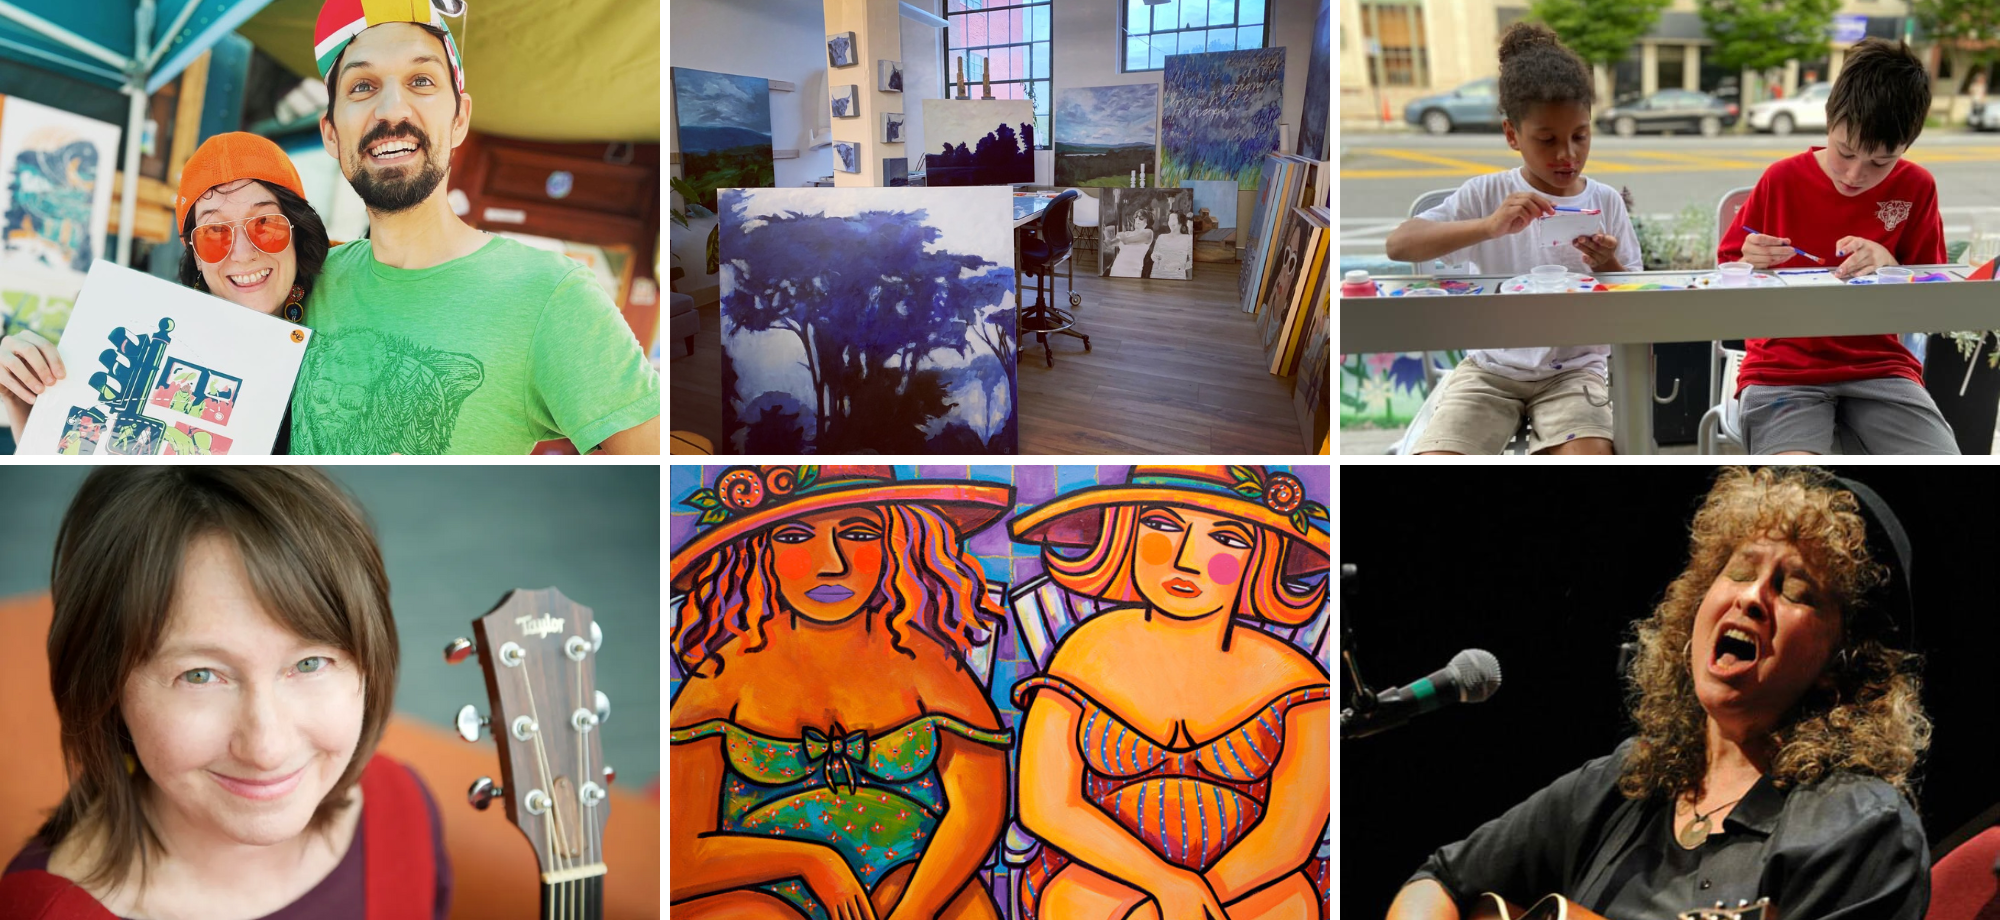 August 4 First Fridays Artswalk: Live Music, Art Market, Silent Art Auction, Live Painting, and a Free Kids’ Paint & Sip and Scavenger Hunt! Pittsfield MA